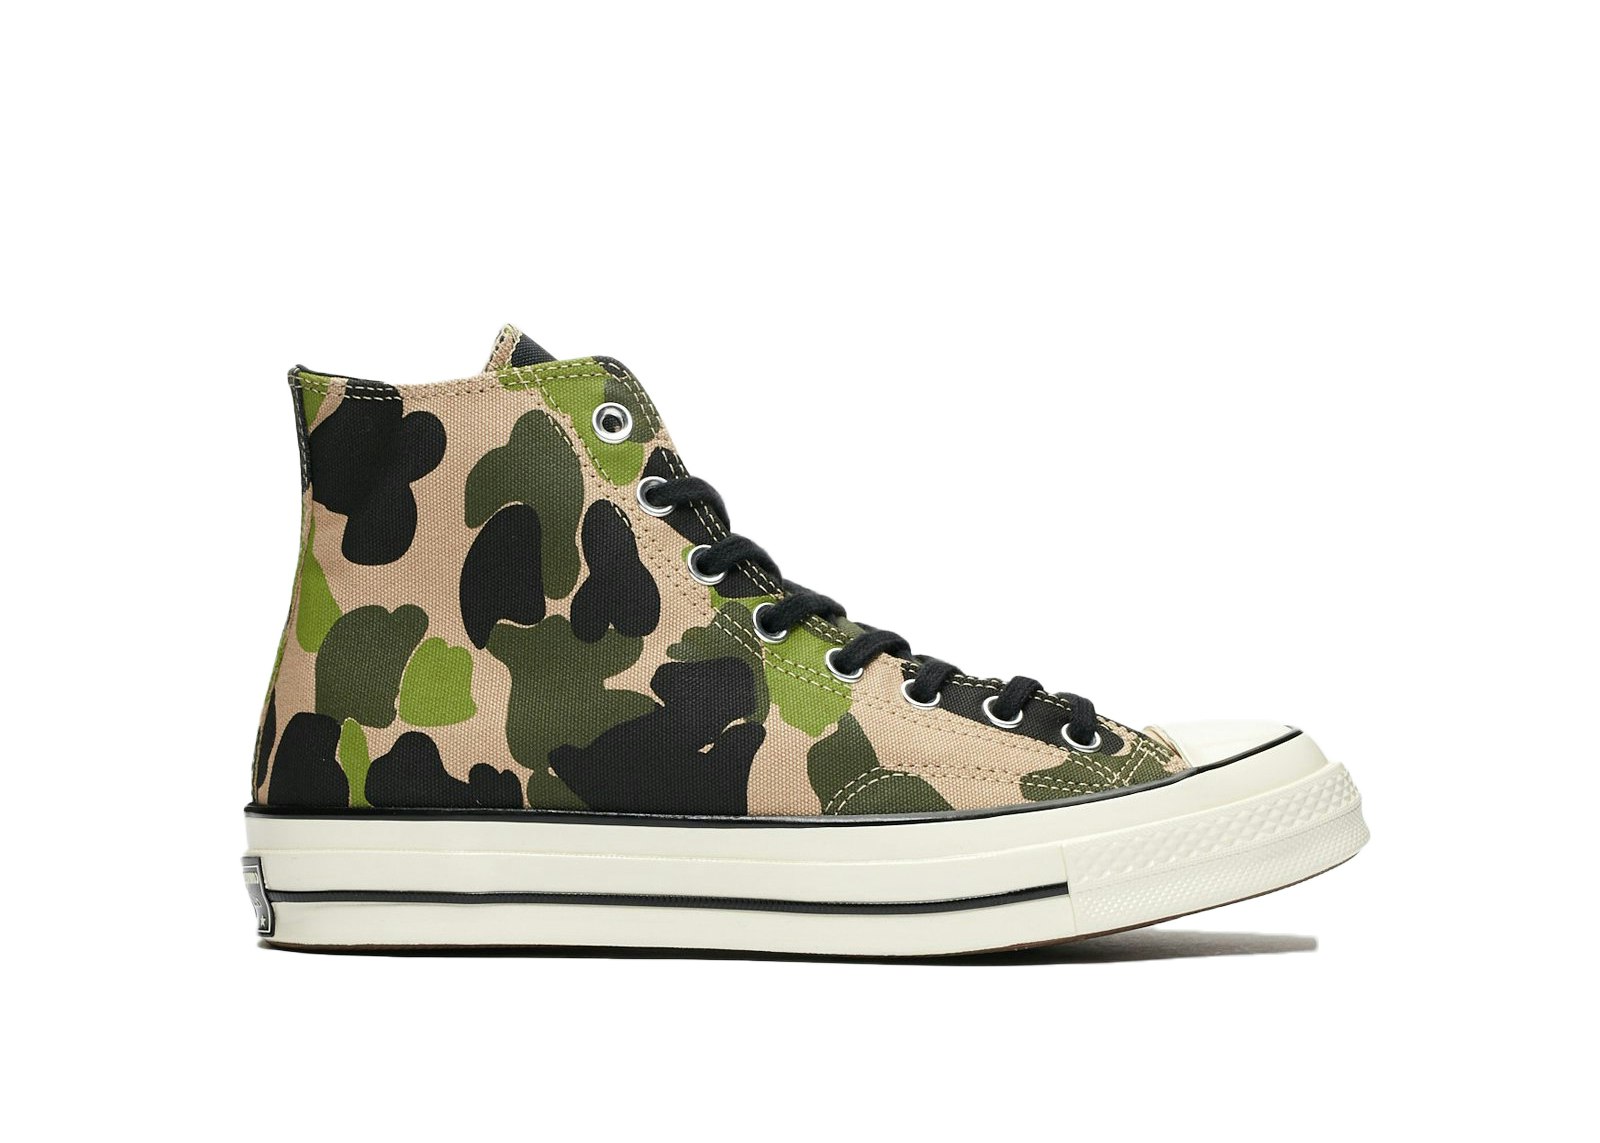 Converse | Shoes | Converse Chuck Taylors All Stars Camouflage Sneakers New  Without Tags | Poshmark